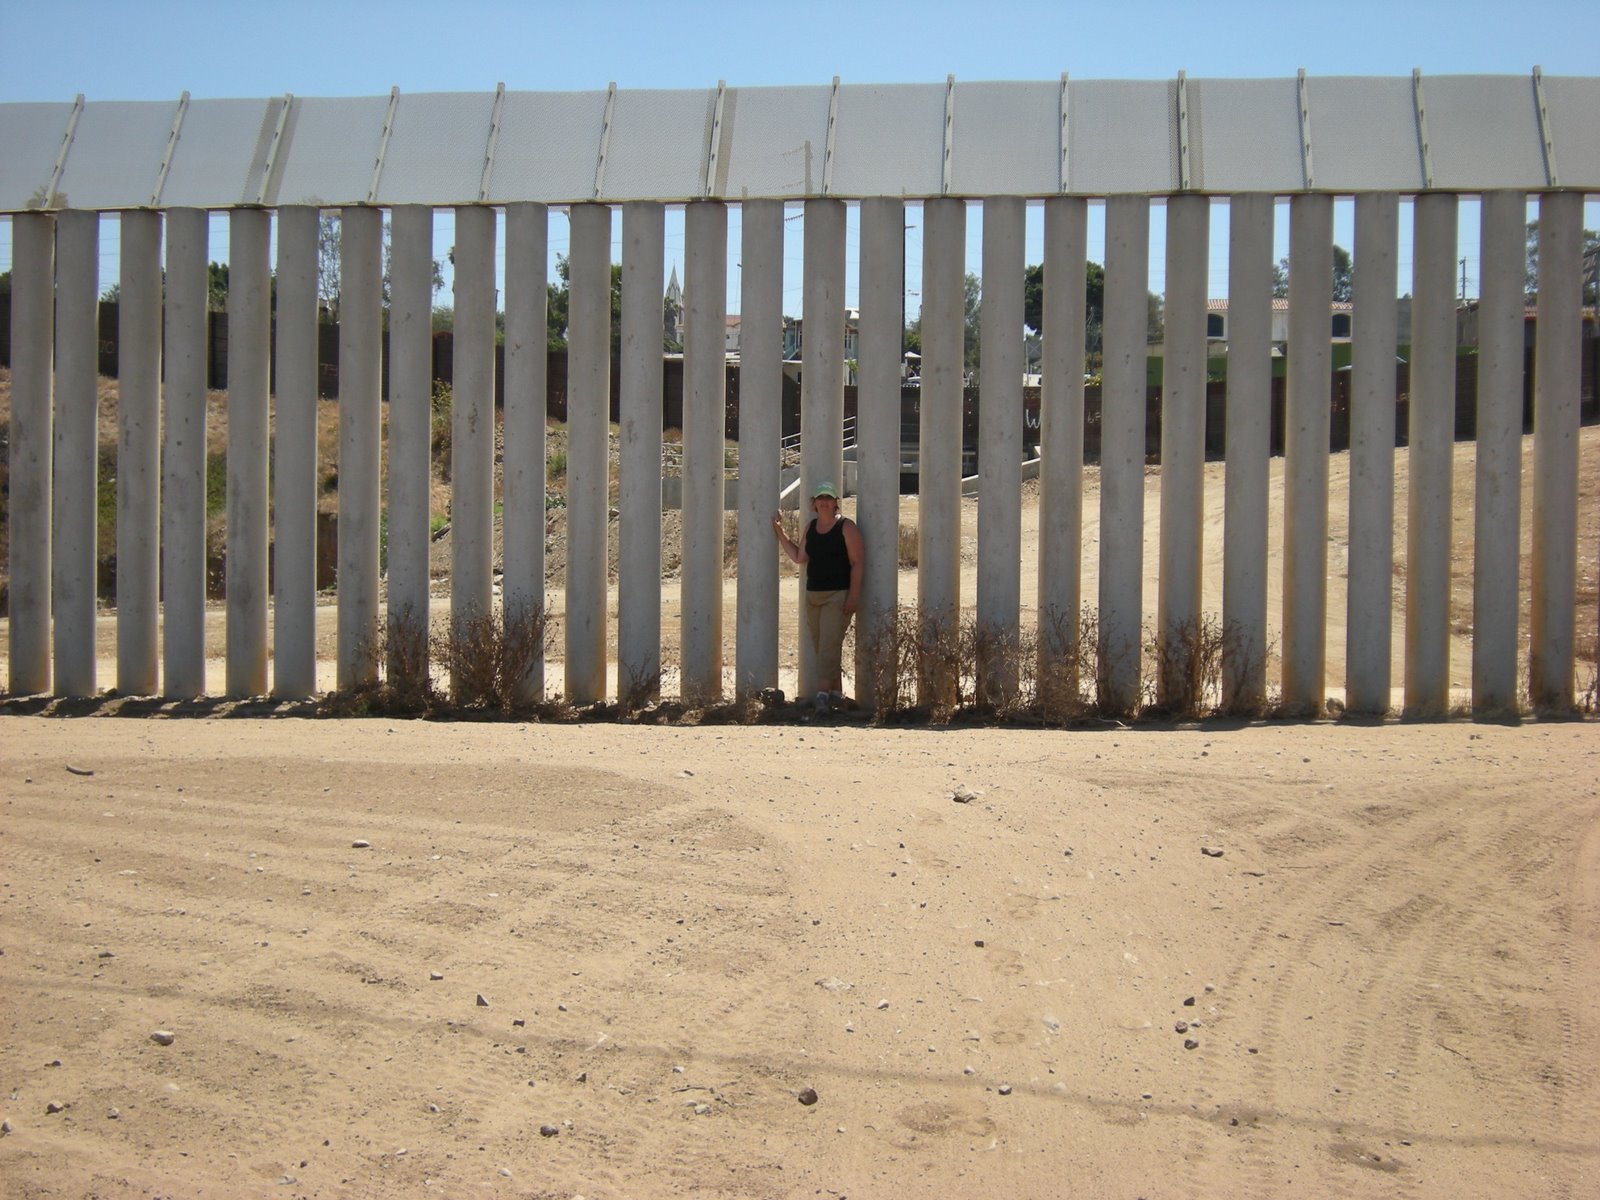 Triple Border Fence Project Wins "Onion" Award for Worst Architecture in San Diego